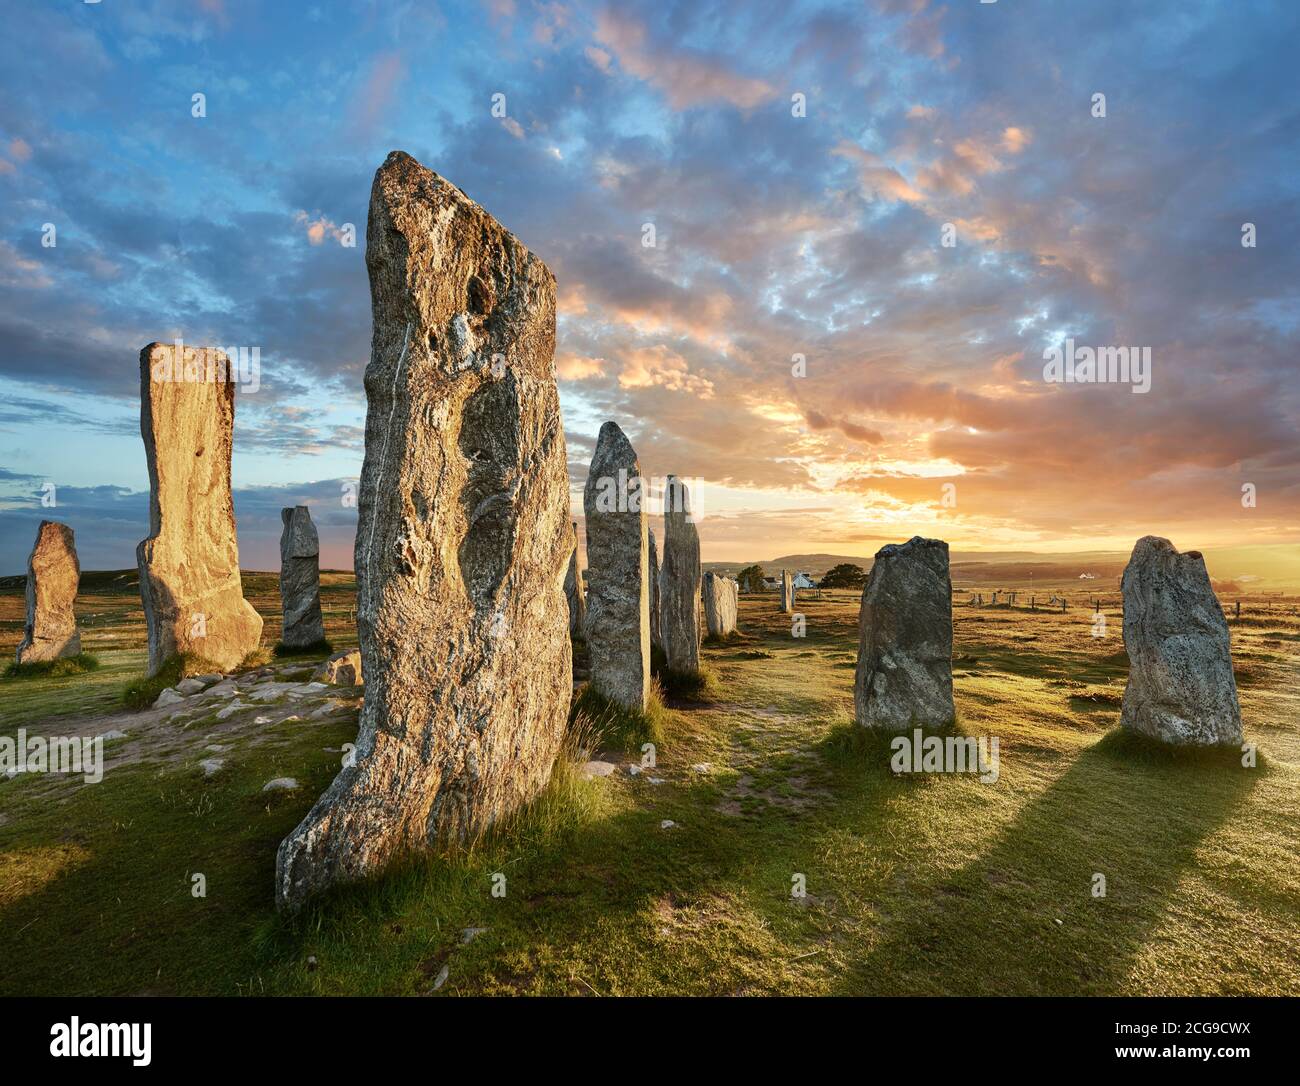 Calanais Standing Stones central stone, at sunset,  circle erected between 2900-2600BC measuring 11 metres wide. At the centre of the ring stands a hu Stock Photo